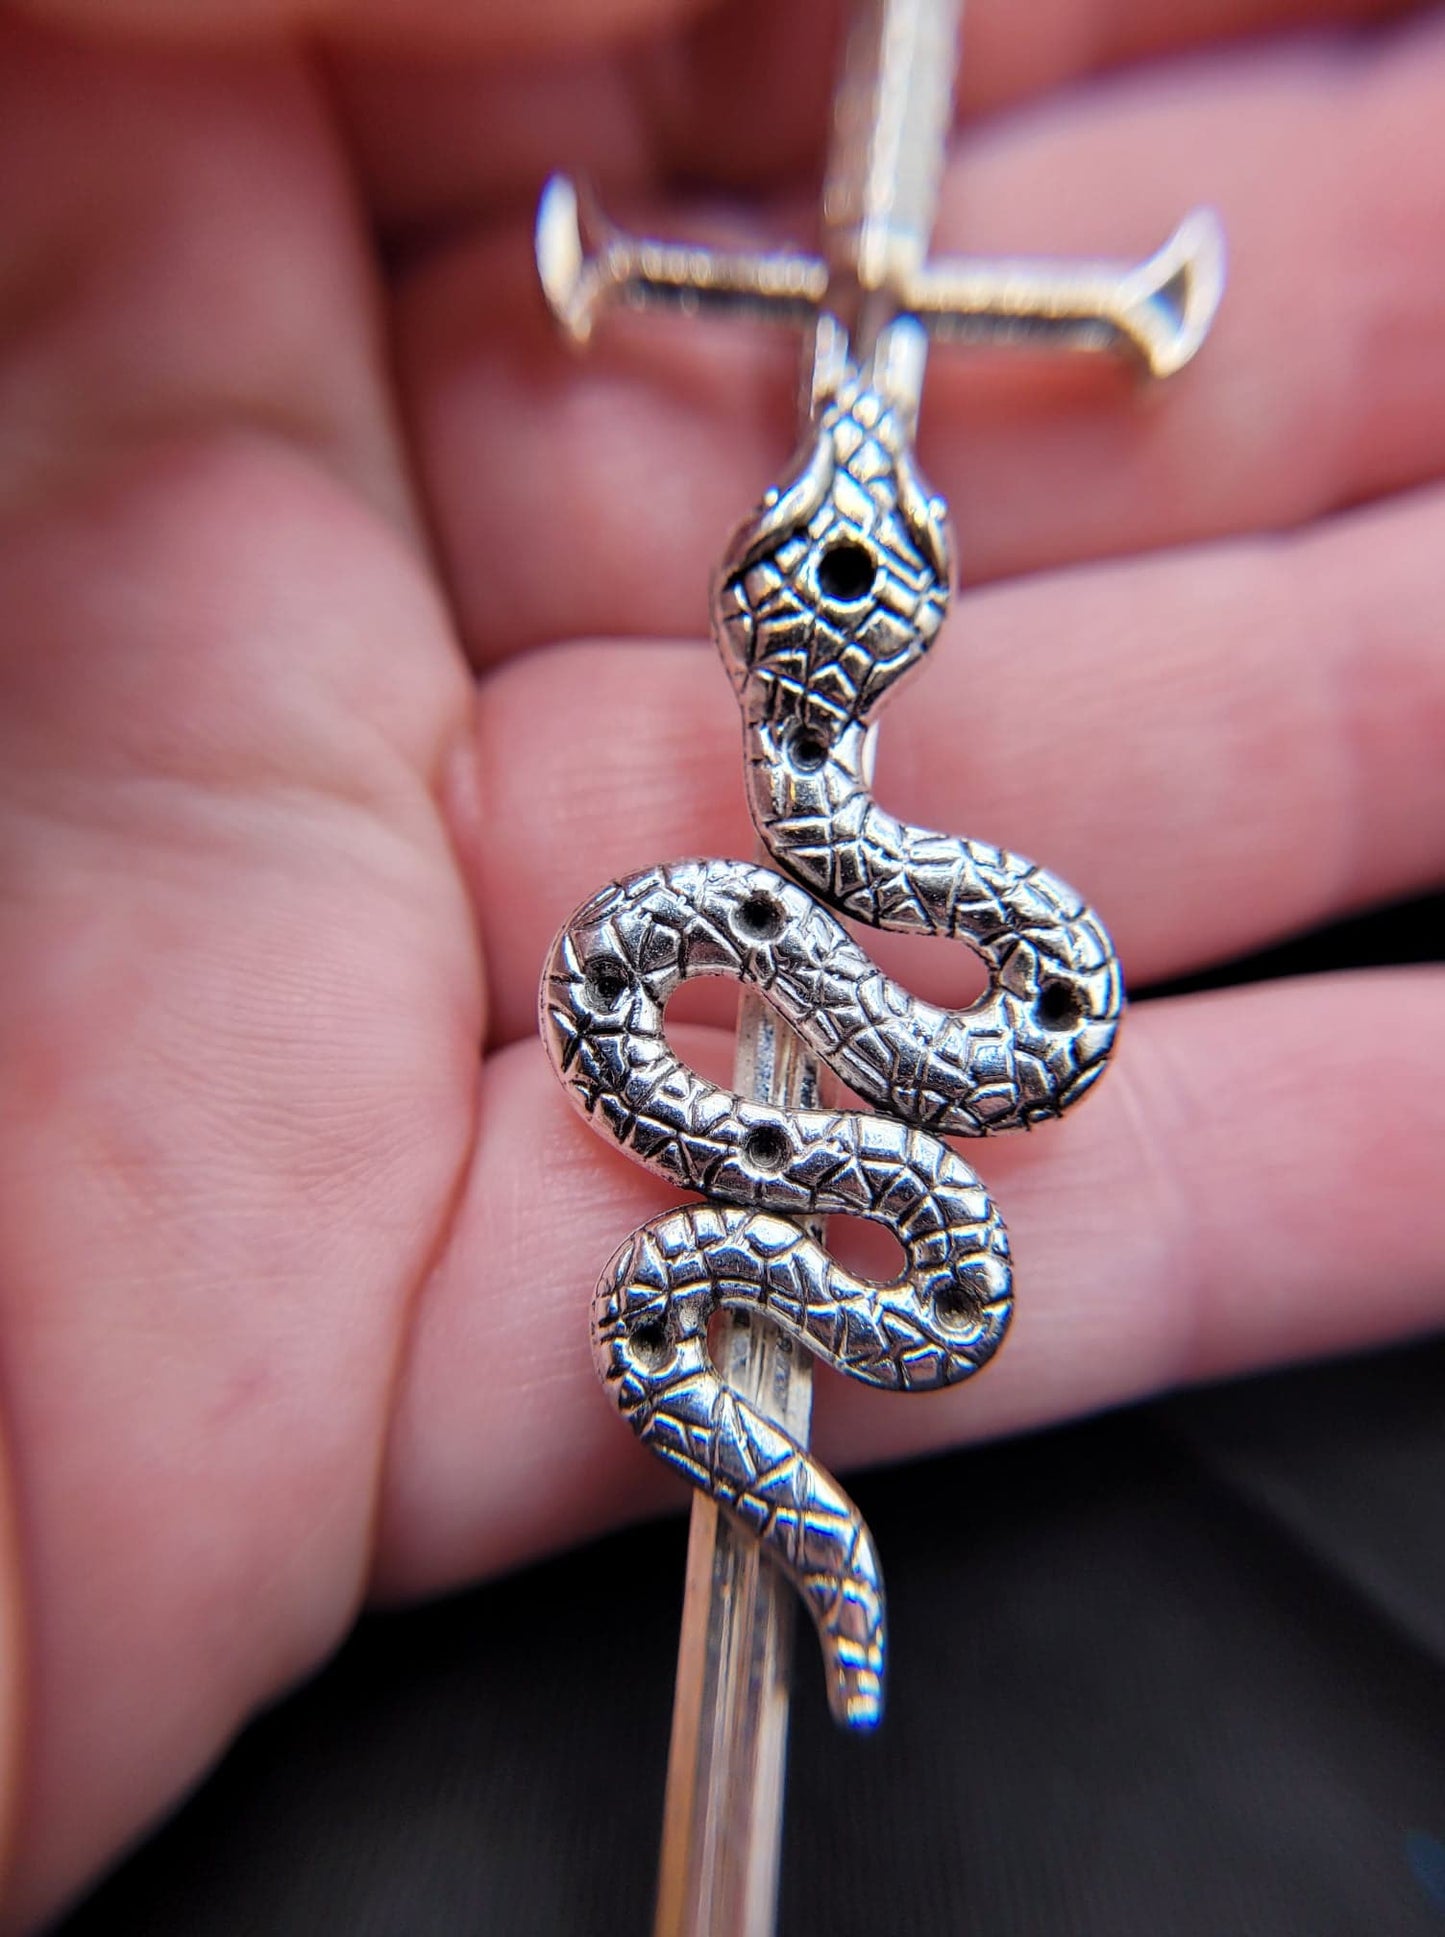 Silver Gothic Occult Fantasy Sword Serpent Snake Charm Pendant Necklace